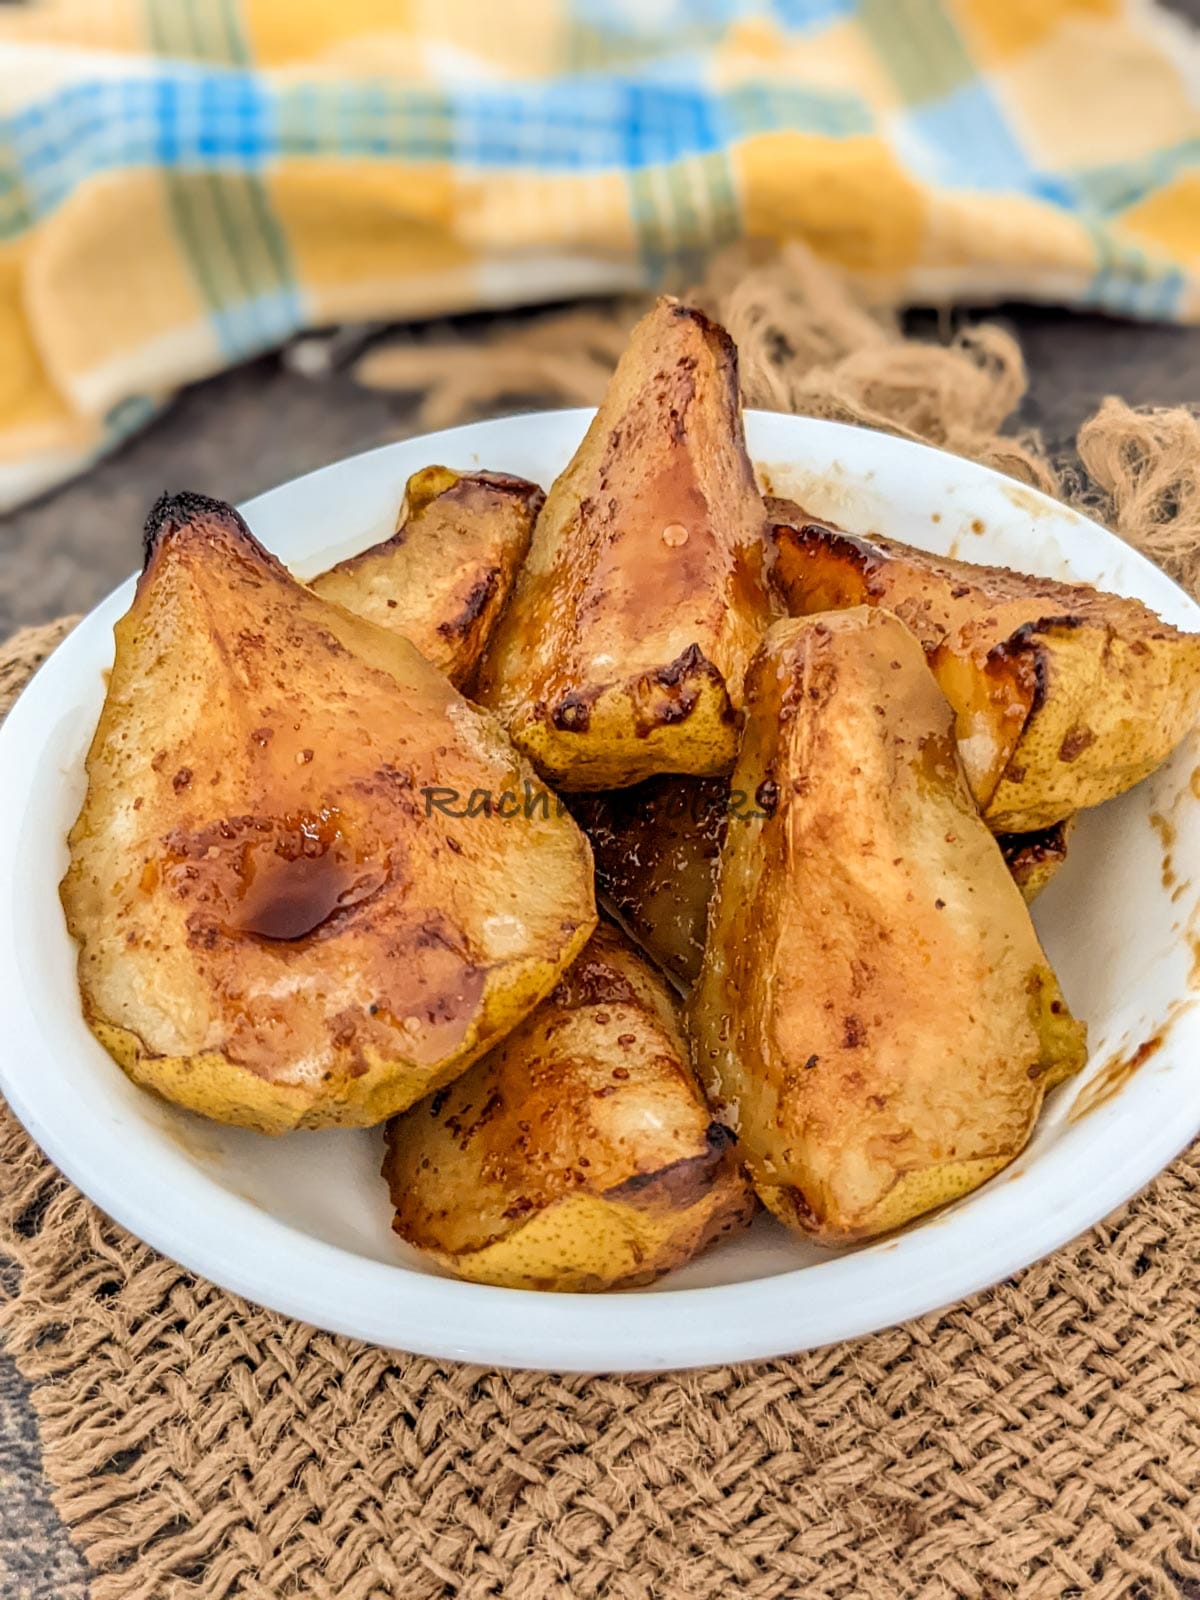 Caramelised air fryer pears on a white plate.